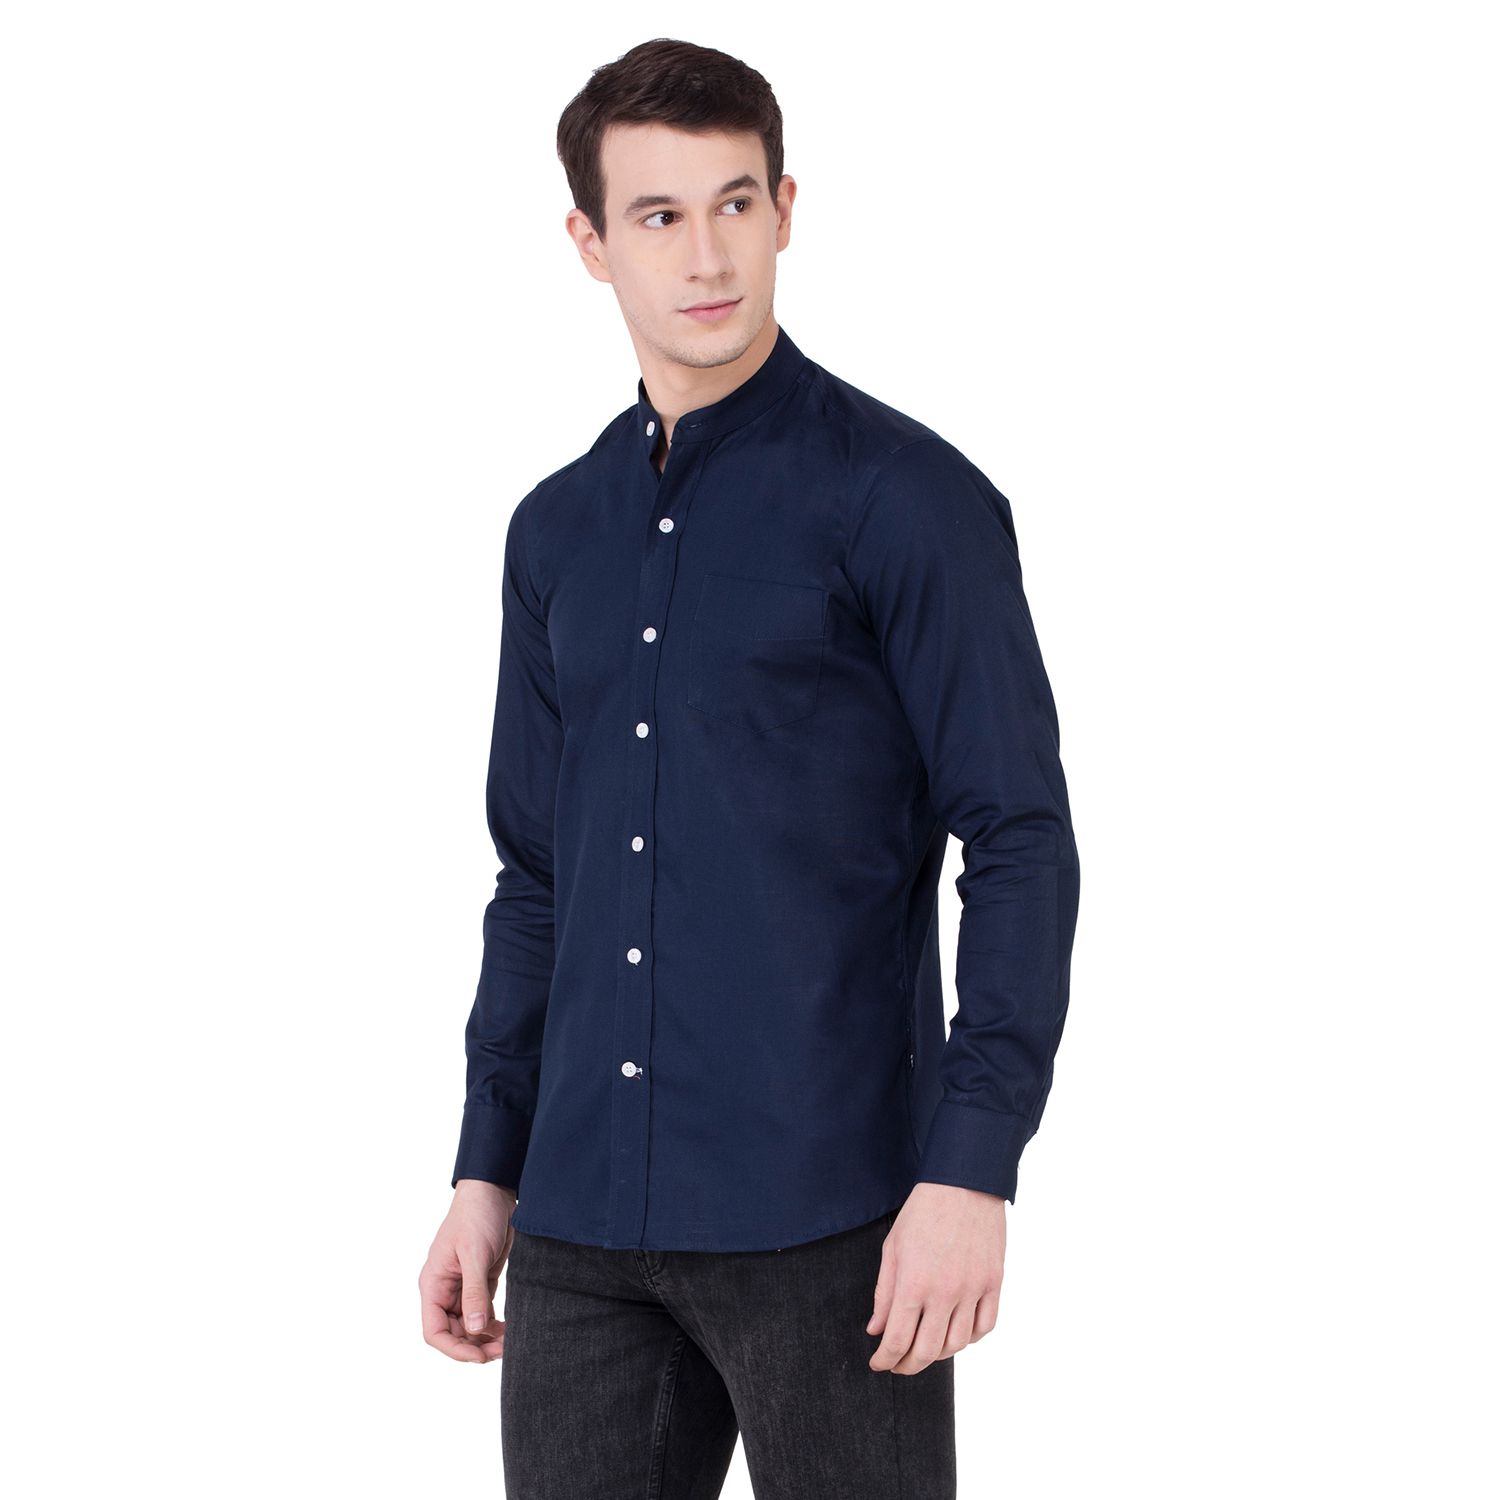 Waggle Navy Slim Fit Shirt - Buy Waggle Navy Slim Fit Shirt Online at ...